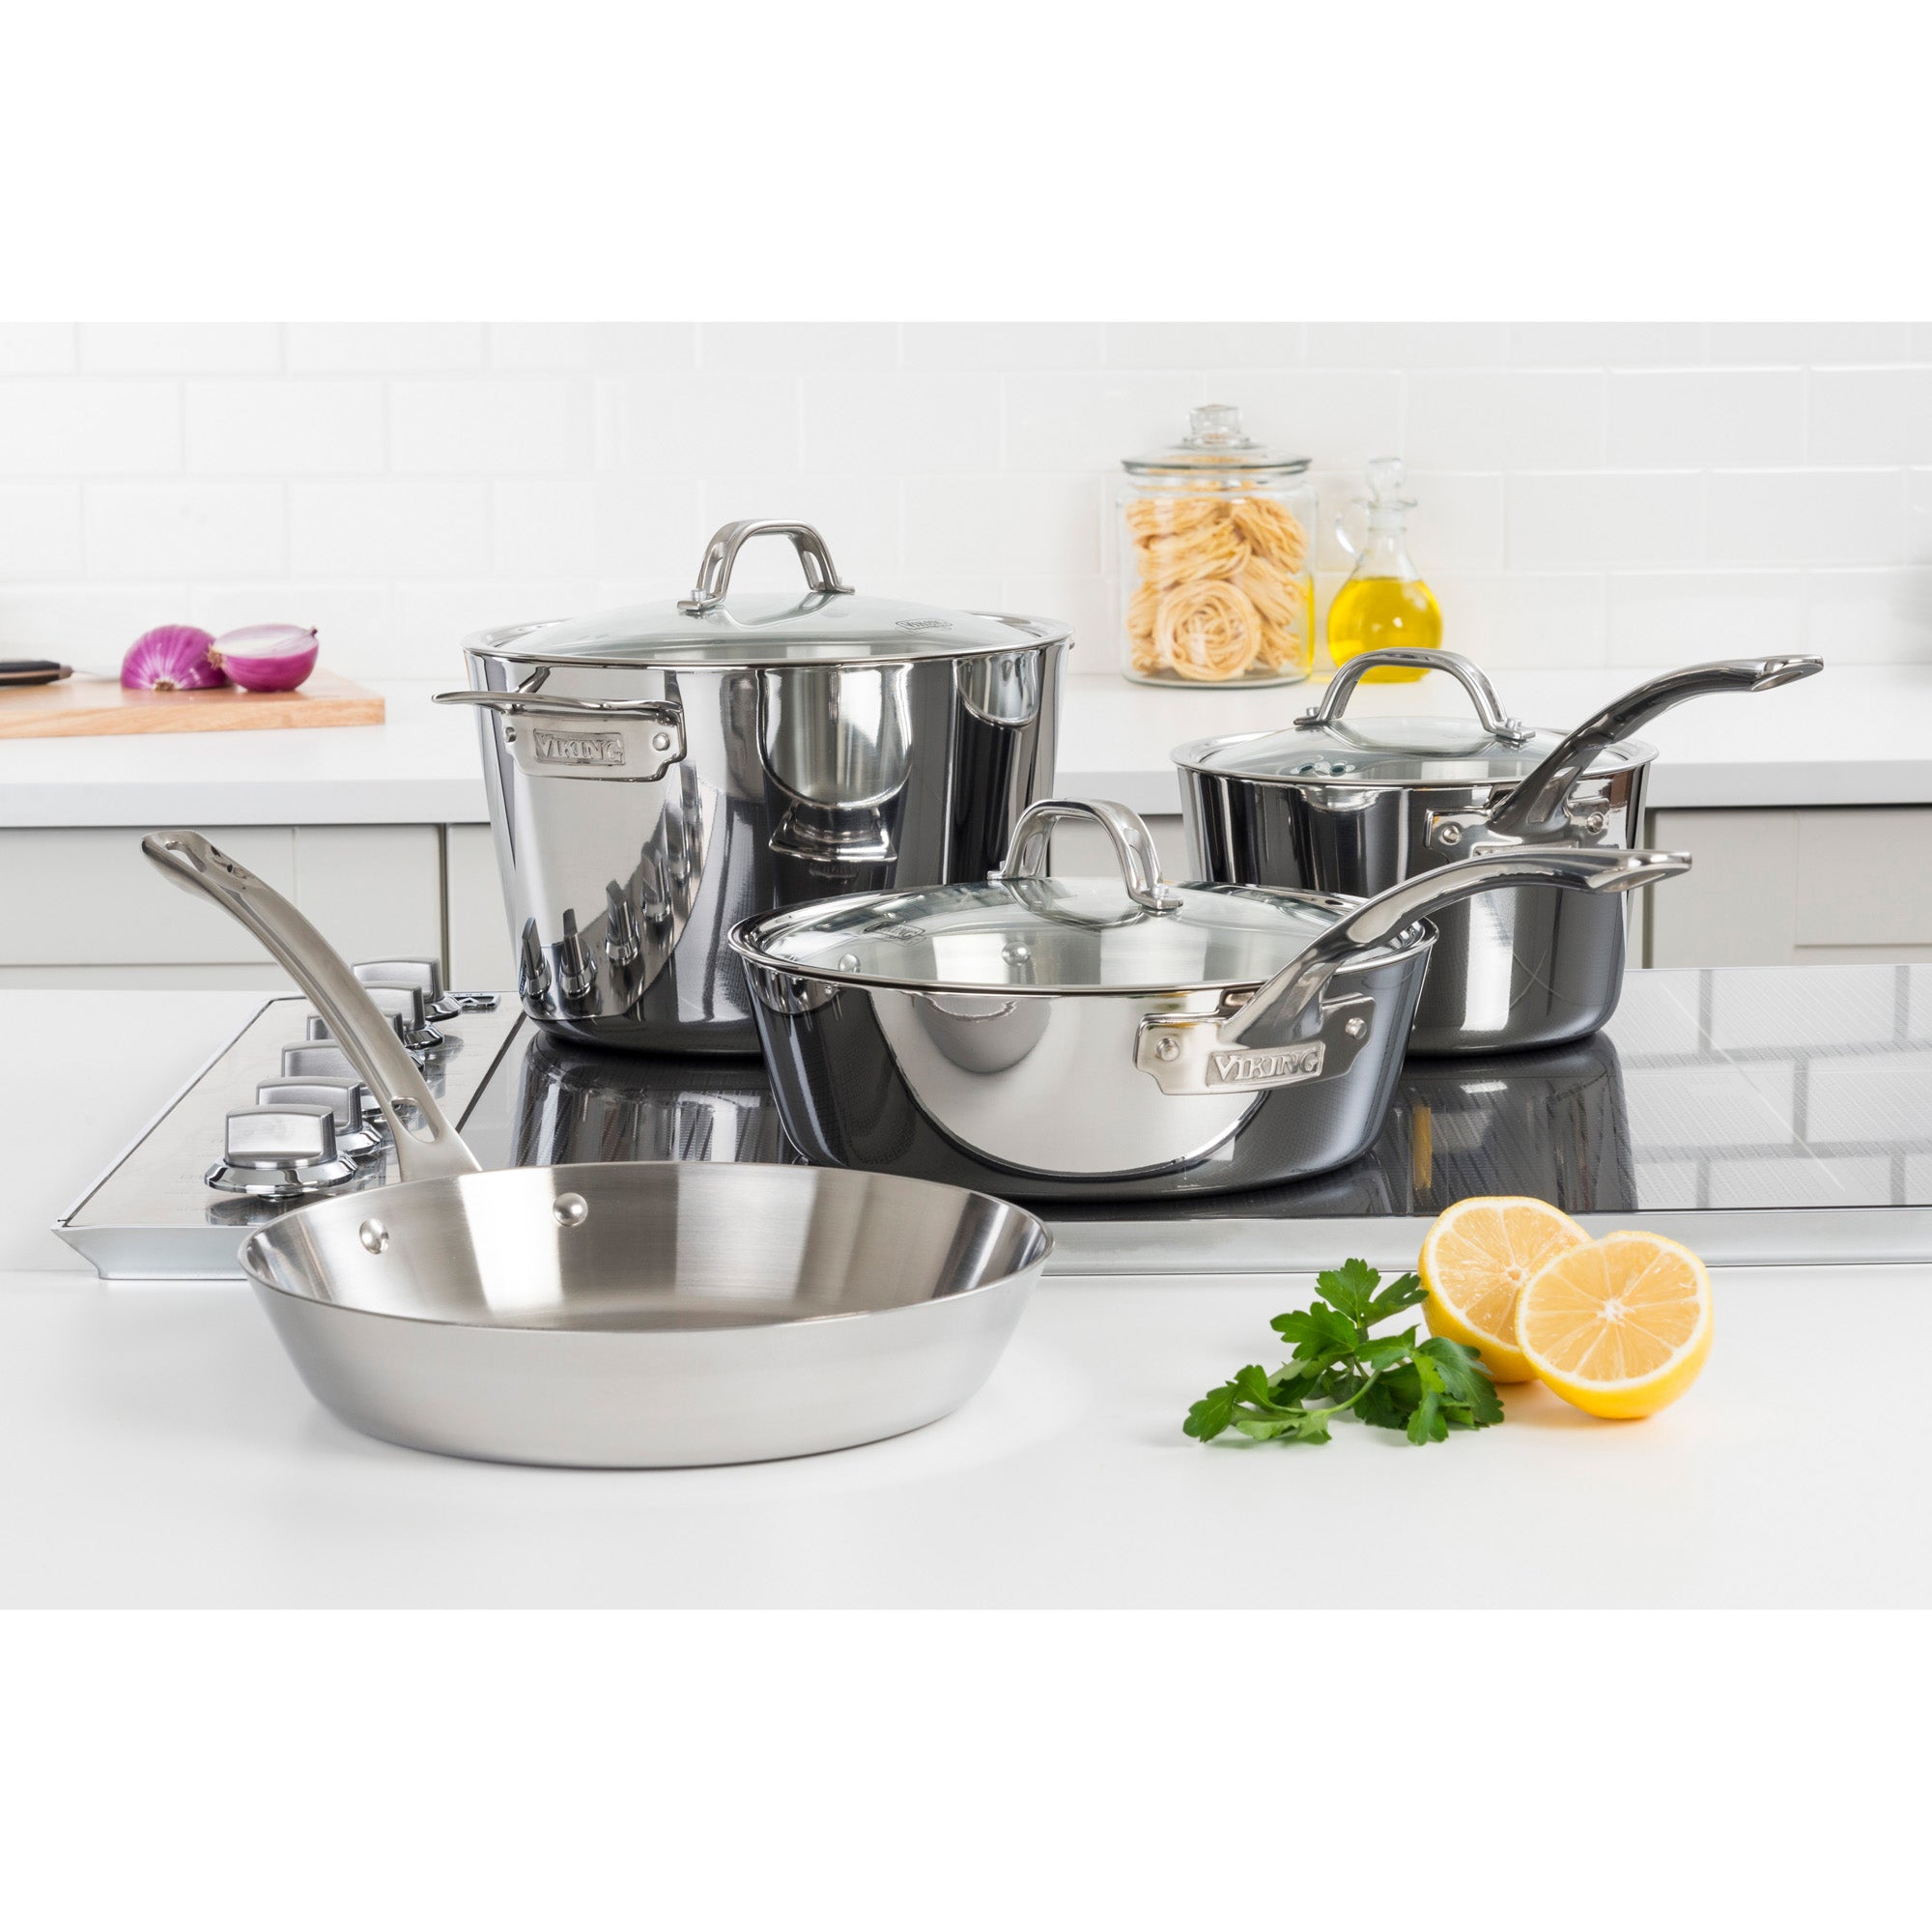 Viking Contemporary 3-Ply Stainless Steel 7-Piece Cookware Set with Glass Lids